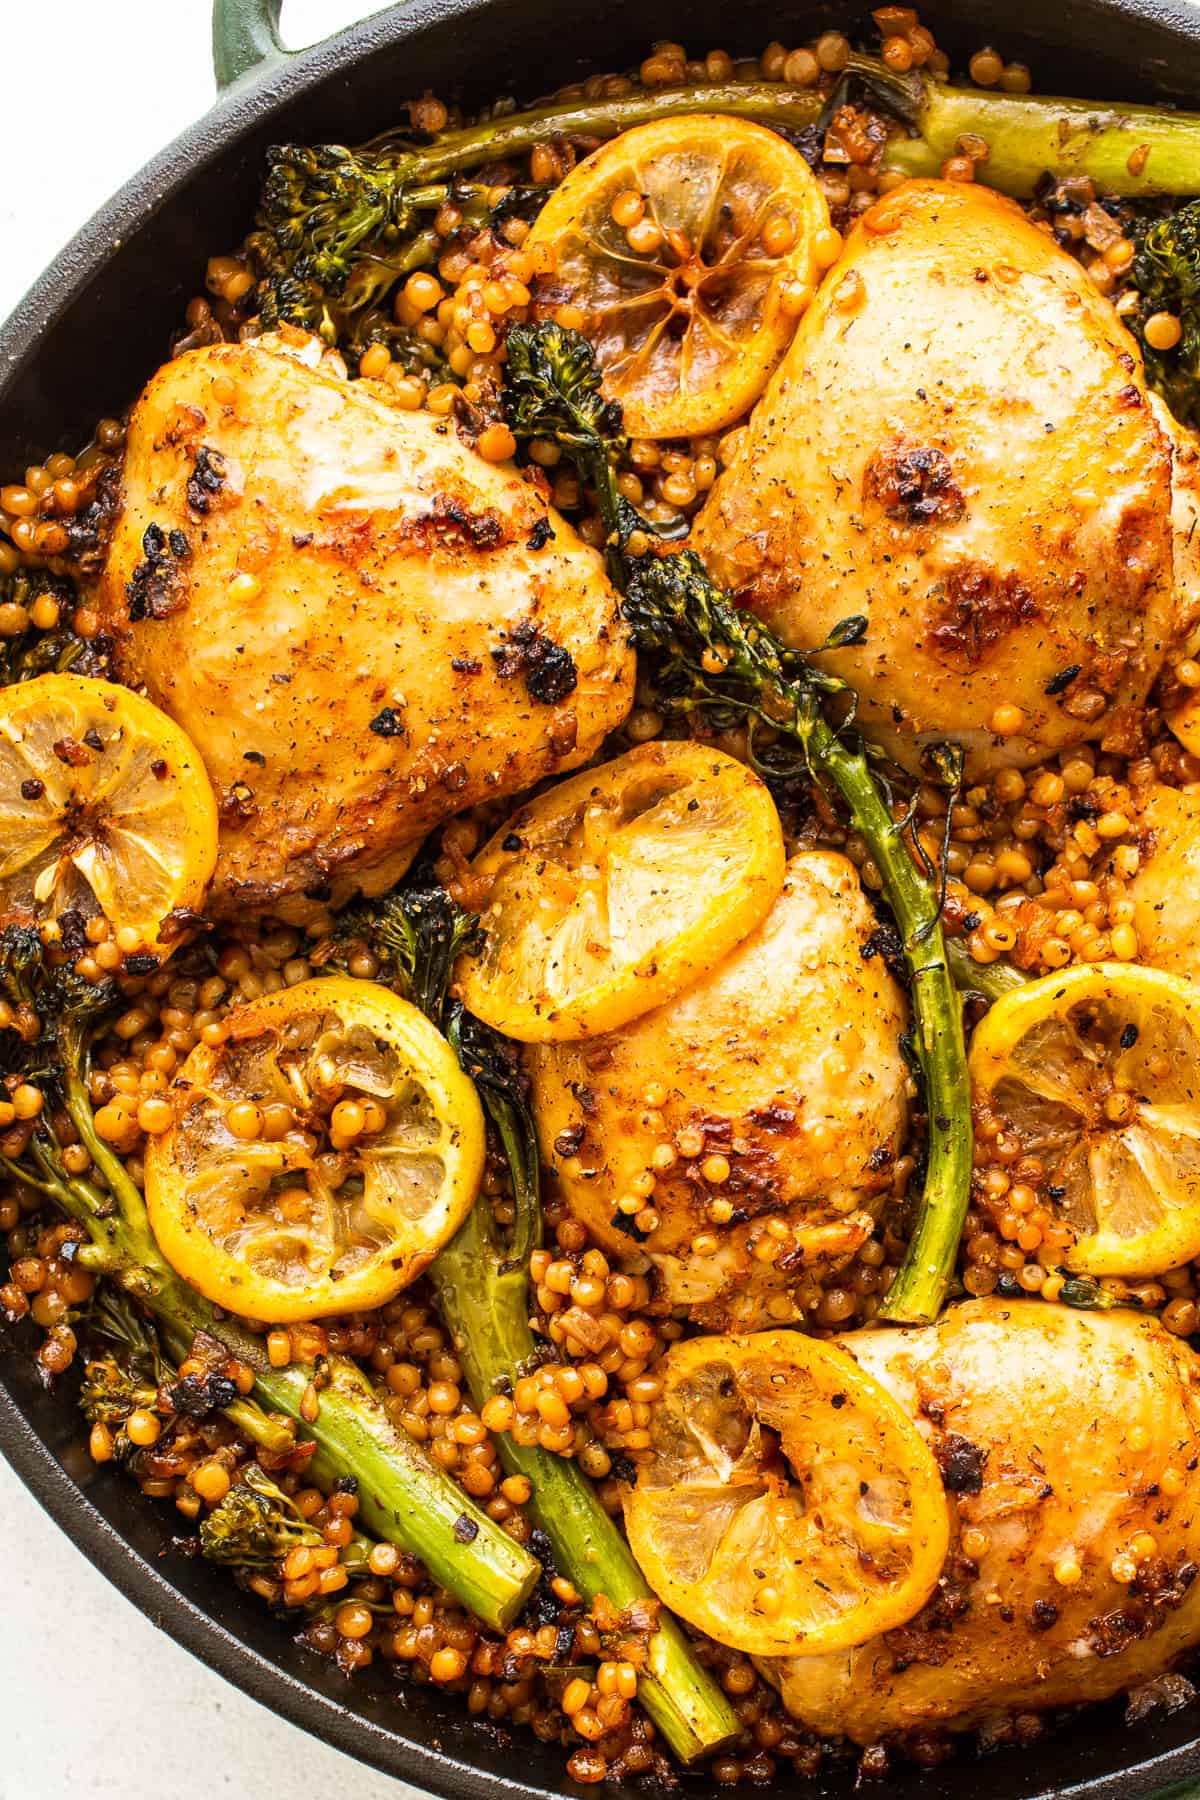 Lemon chicken skillet with couscous and broccolini.